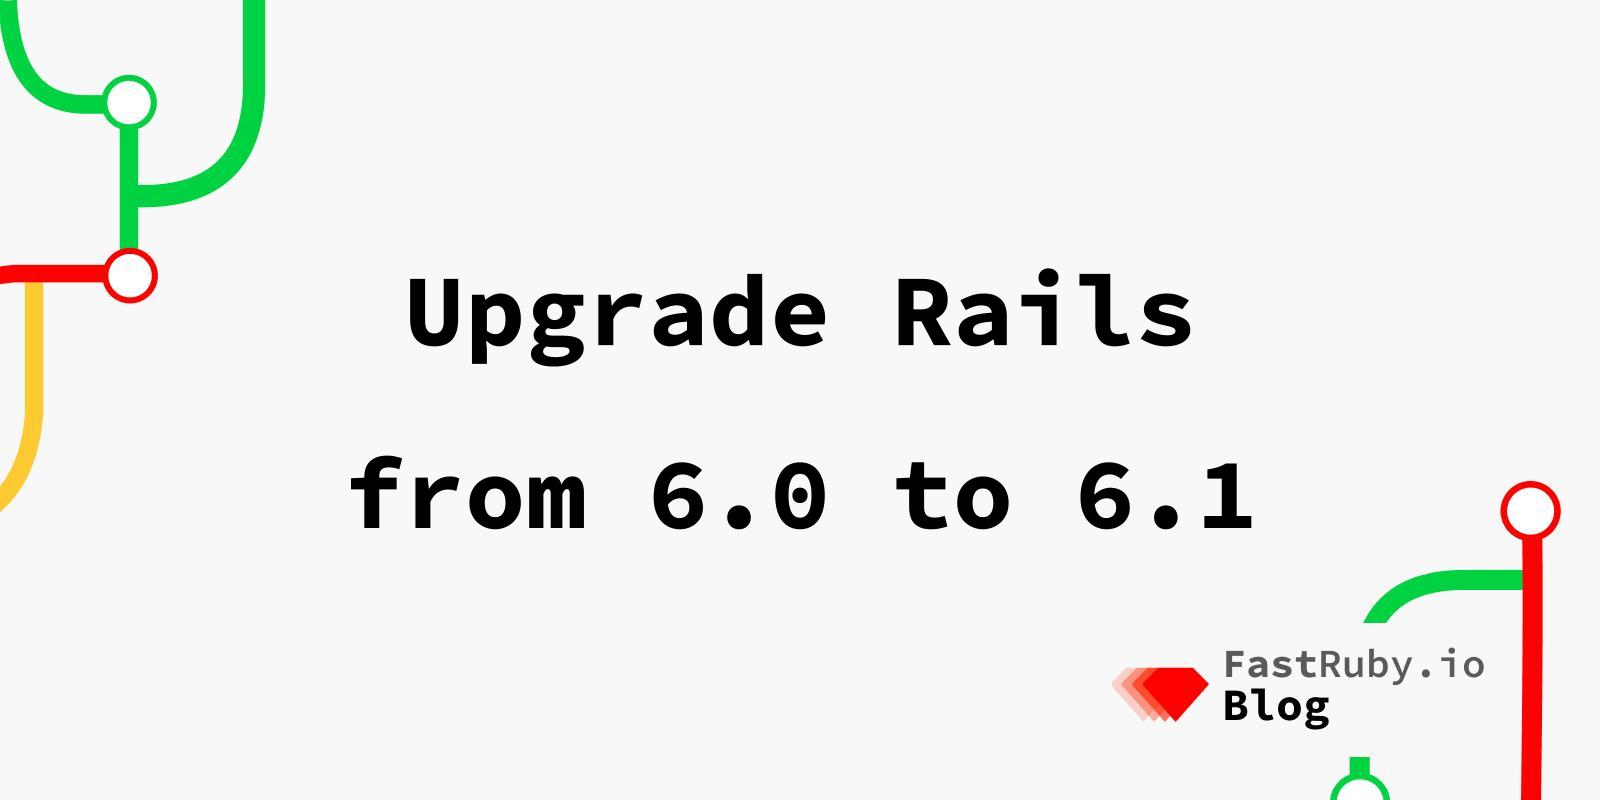 Upgrade Rails from 6.0 to 6.1